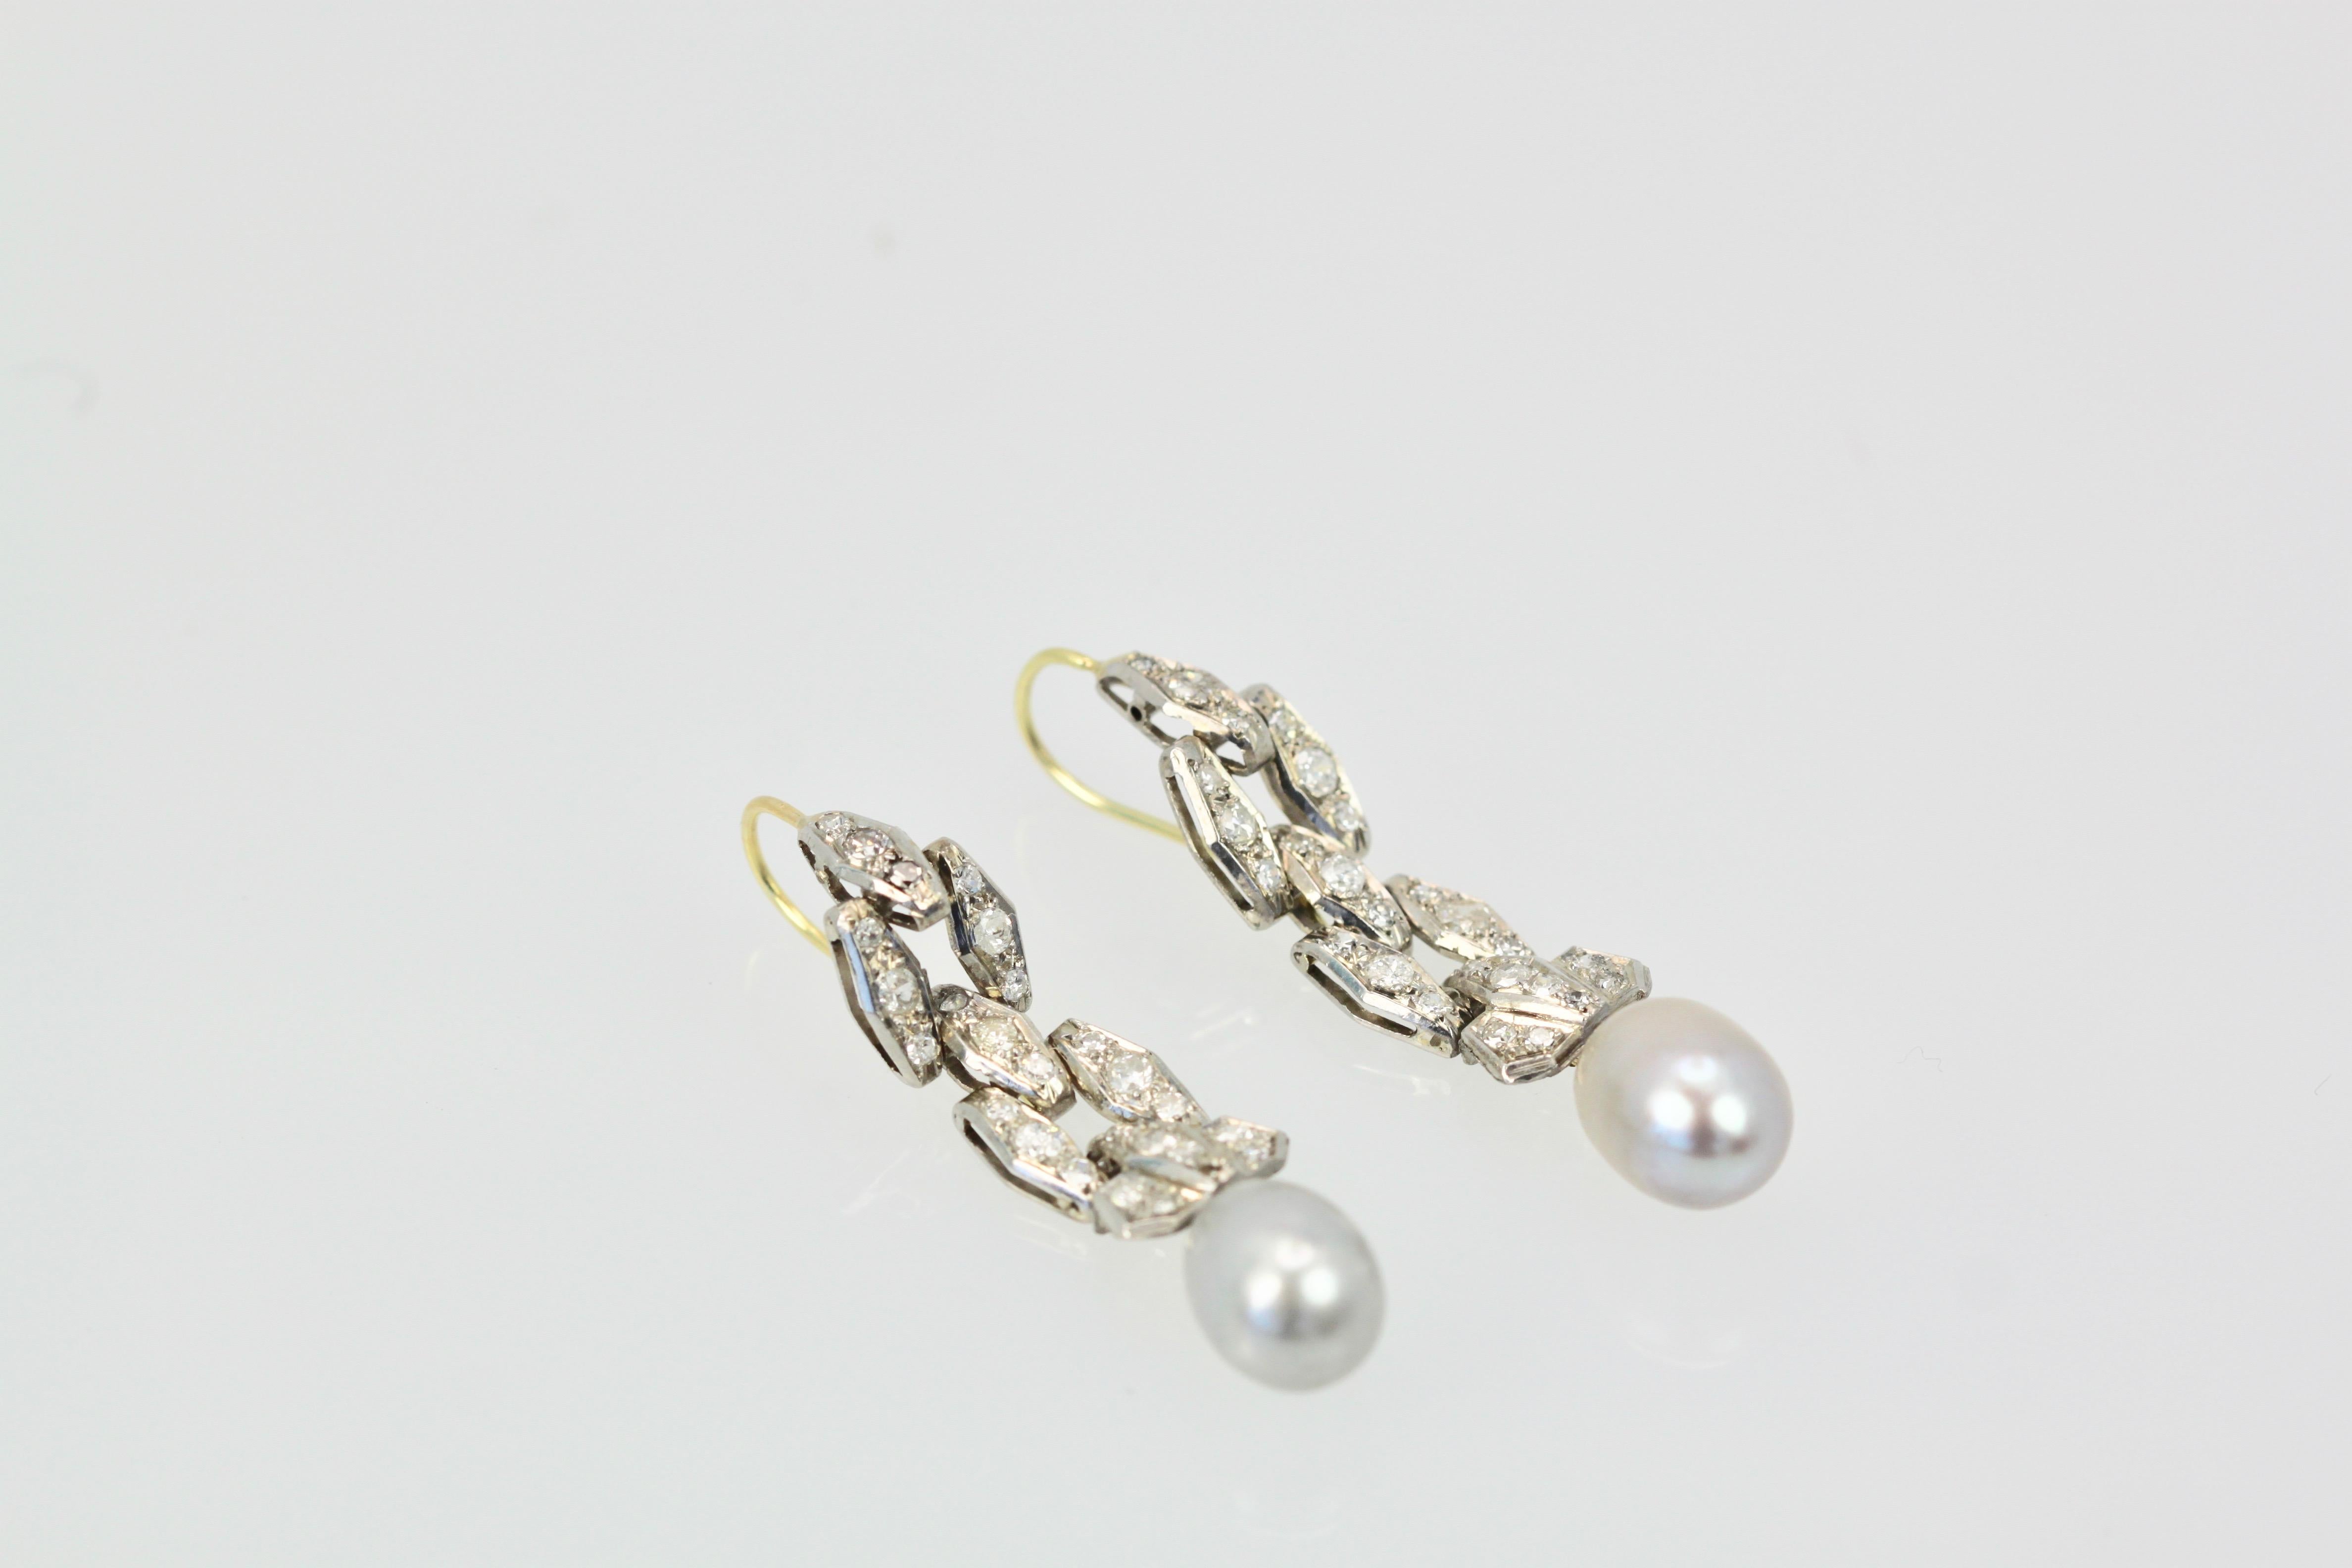 Deco Diamond Pearl Drop Earrings Platinum and 14 Karat Gold In Good Condition For Sale In North Hollywood, CA